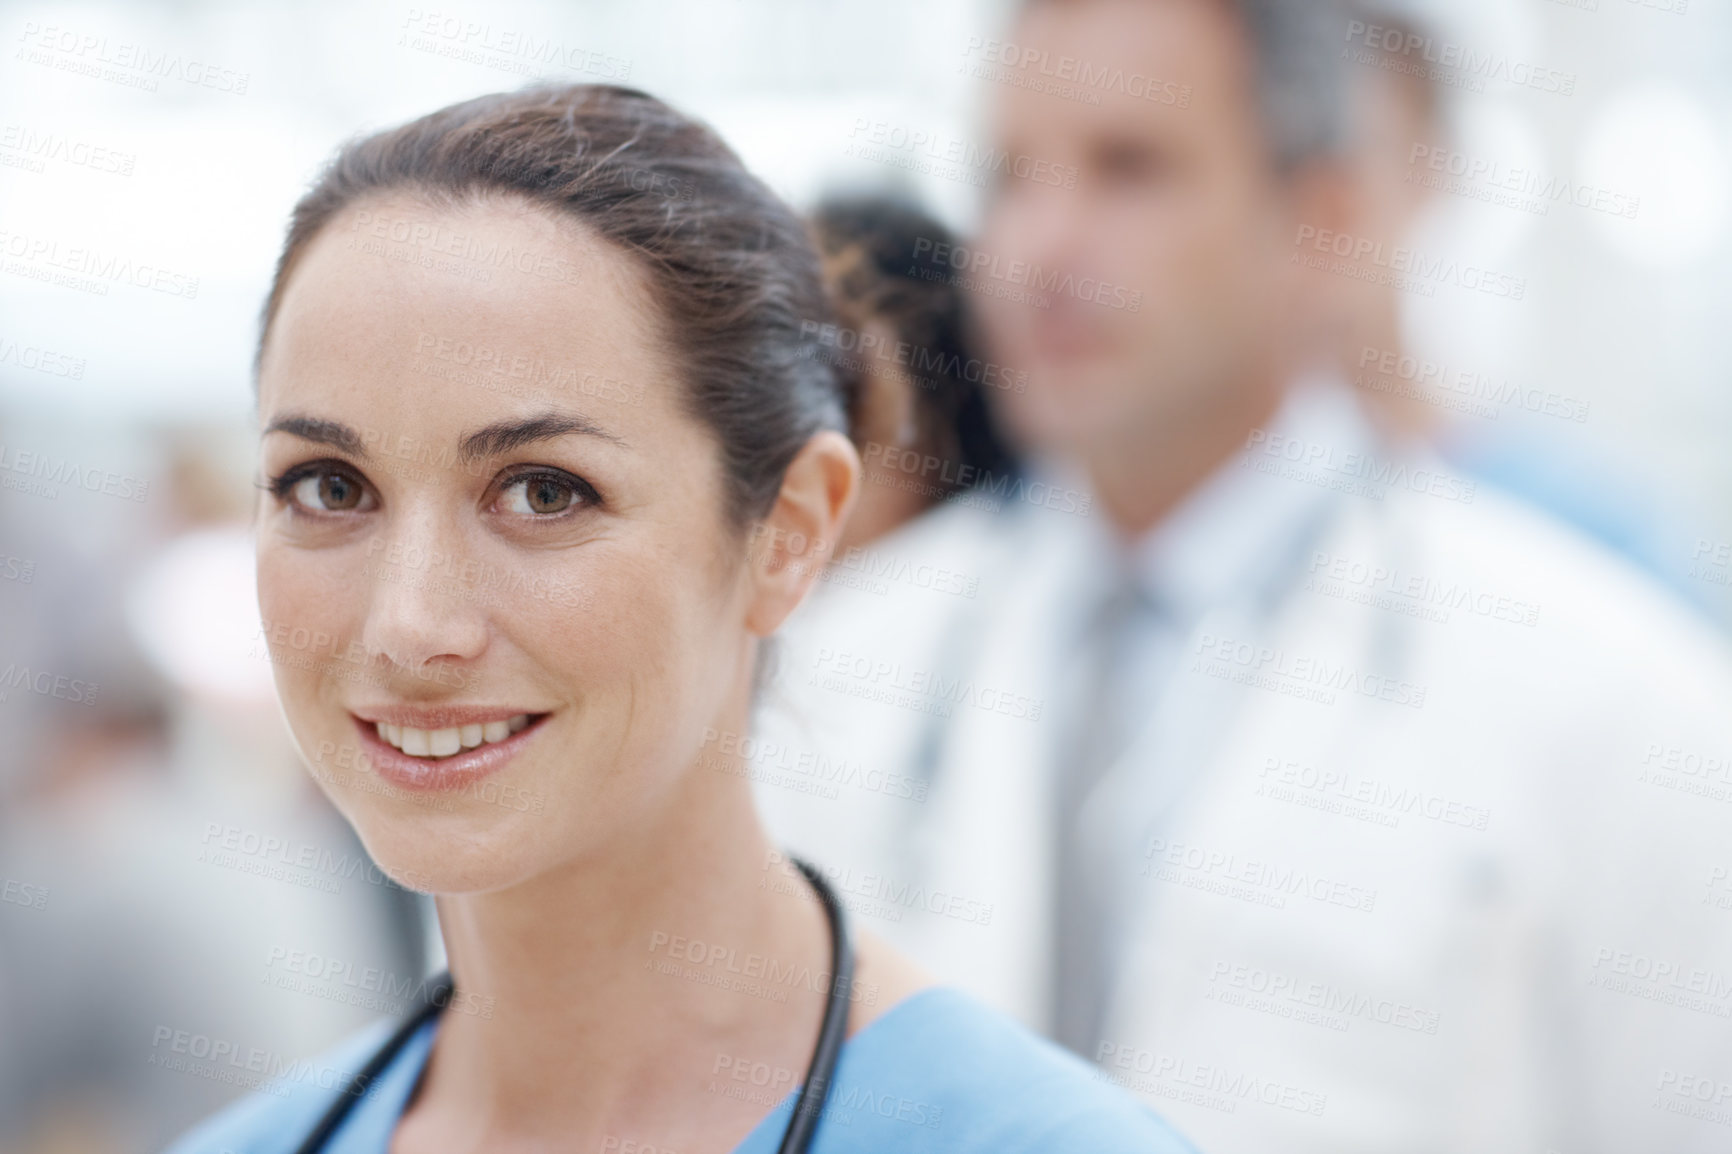 Buy stock photo Young female doctor smiling at the camera with her colleagues in the background